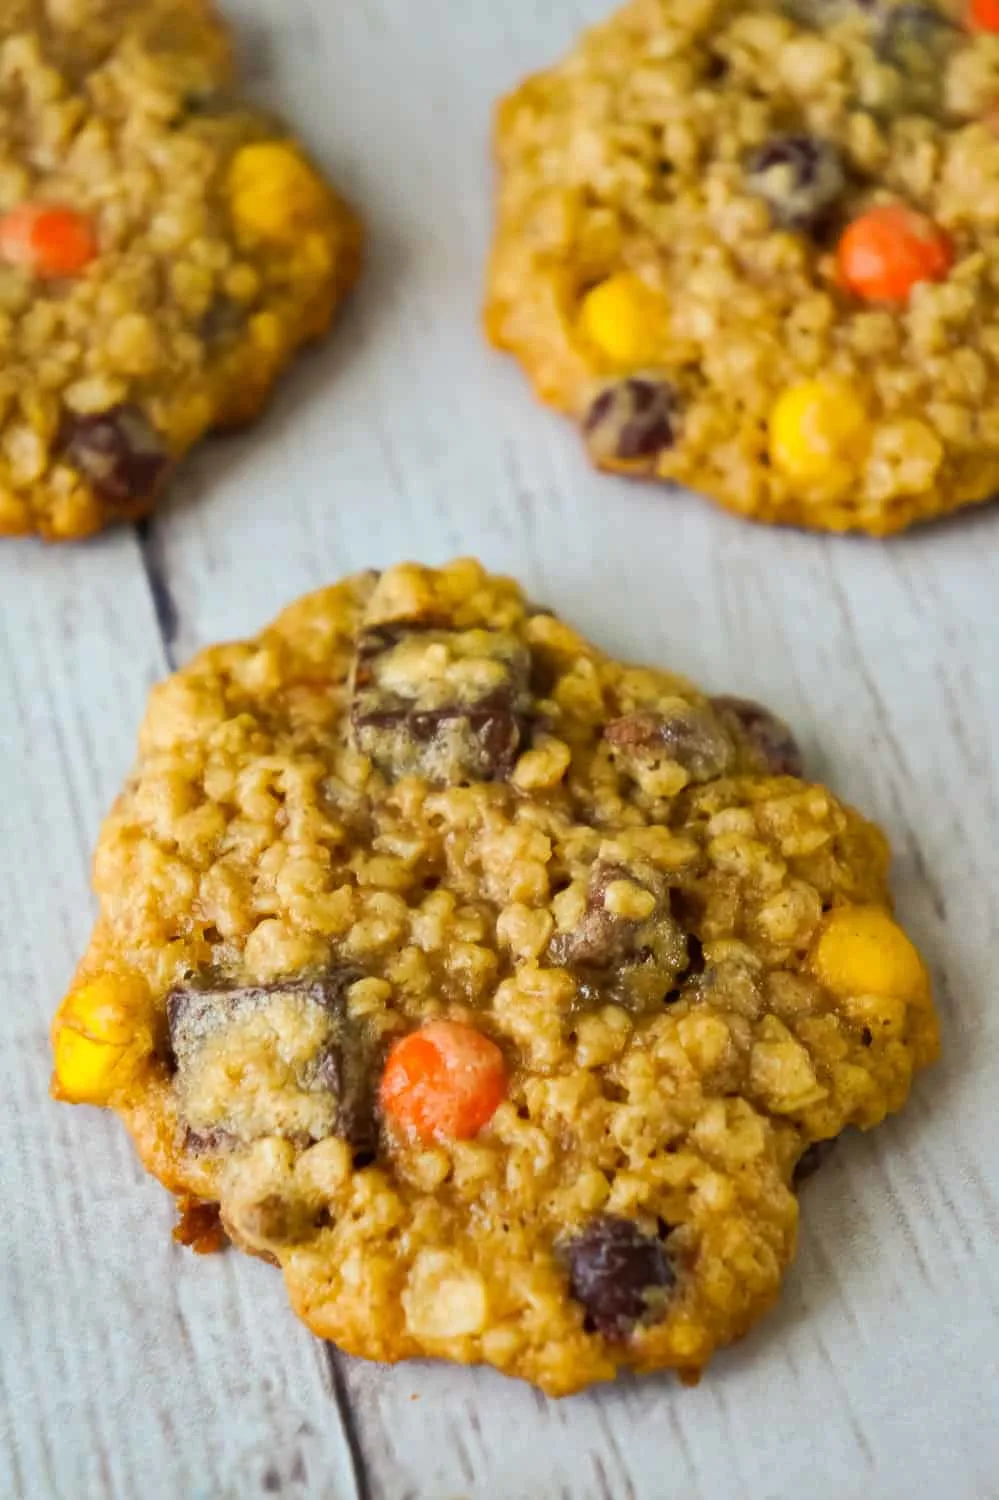 Peanut Butter Oatmeal Cookies with Chocolate Chunks are the perfect dessert recipe for peanut butter lovers. These oatmeal cookies are loaded with mini Reese's Pieces, milk chocolate chips and chocolate chunks.